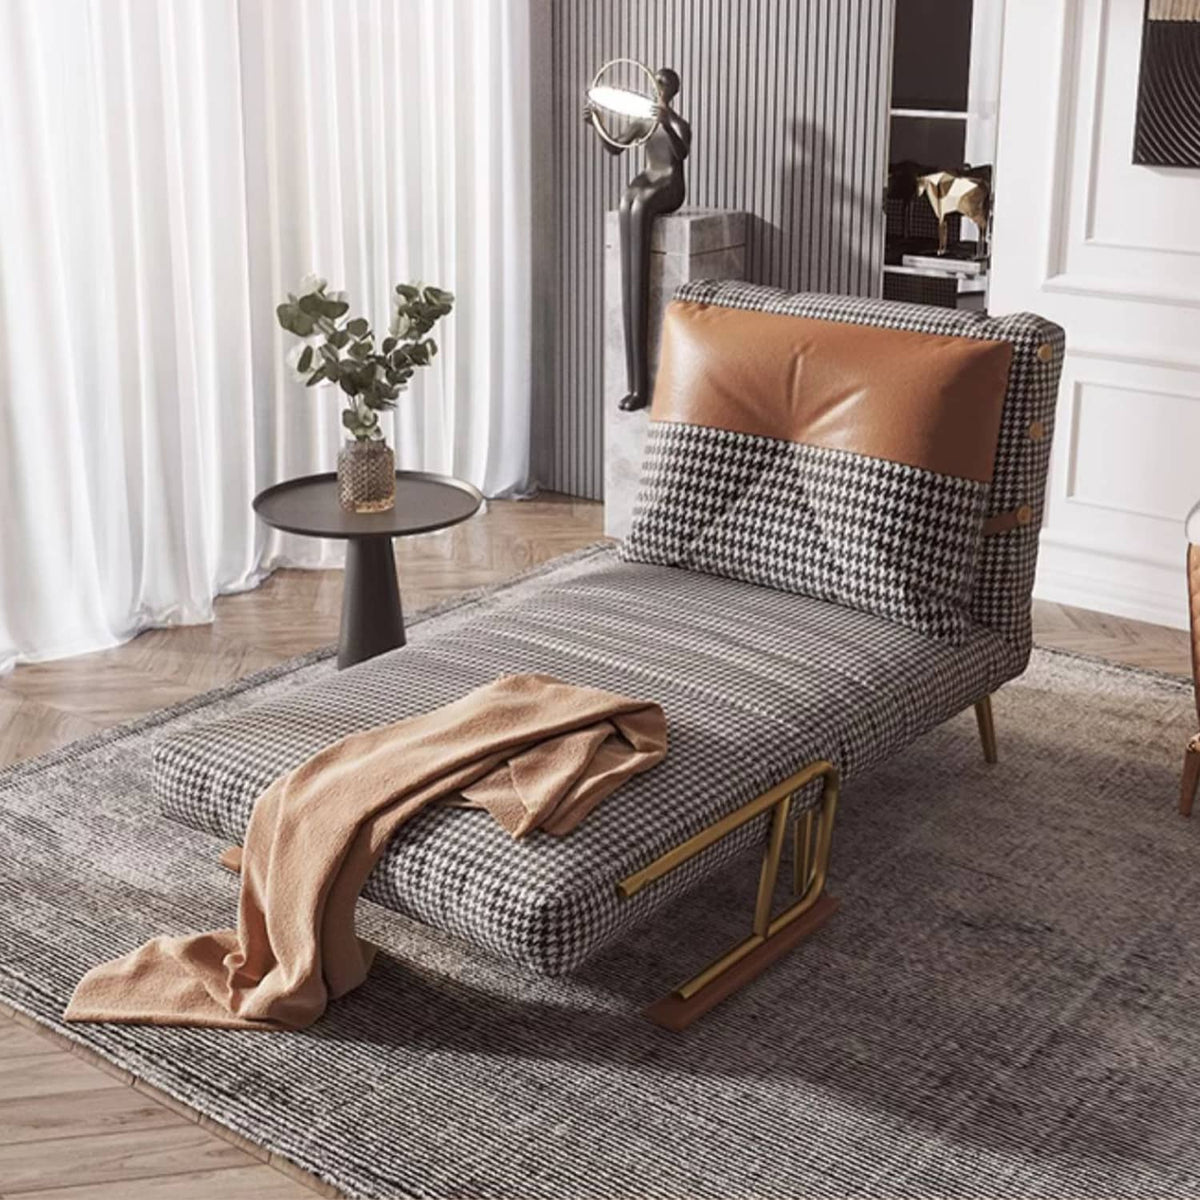 Ultimate Comfort Sofa: Luxurious Cotton, Cotton-Linen, and Leathaire Options for Every Home fbby-1388